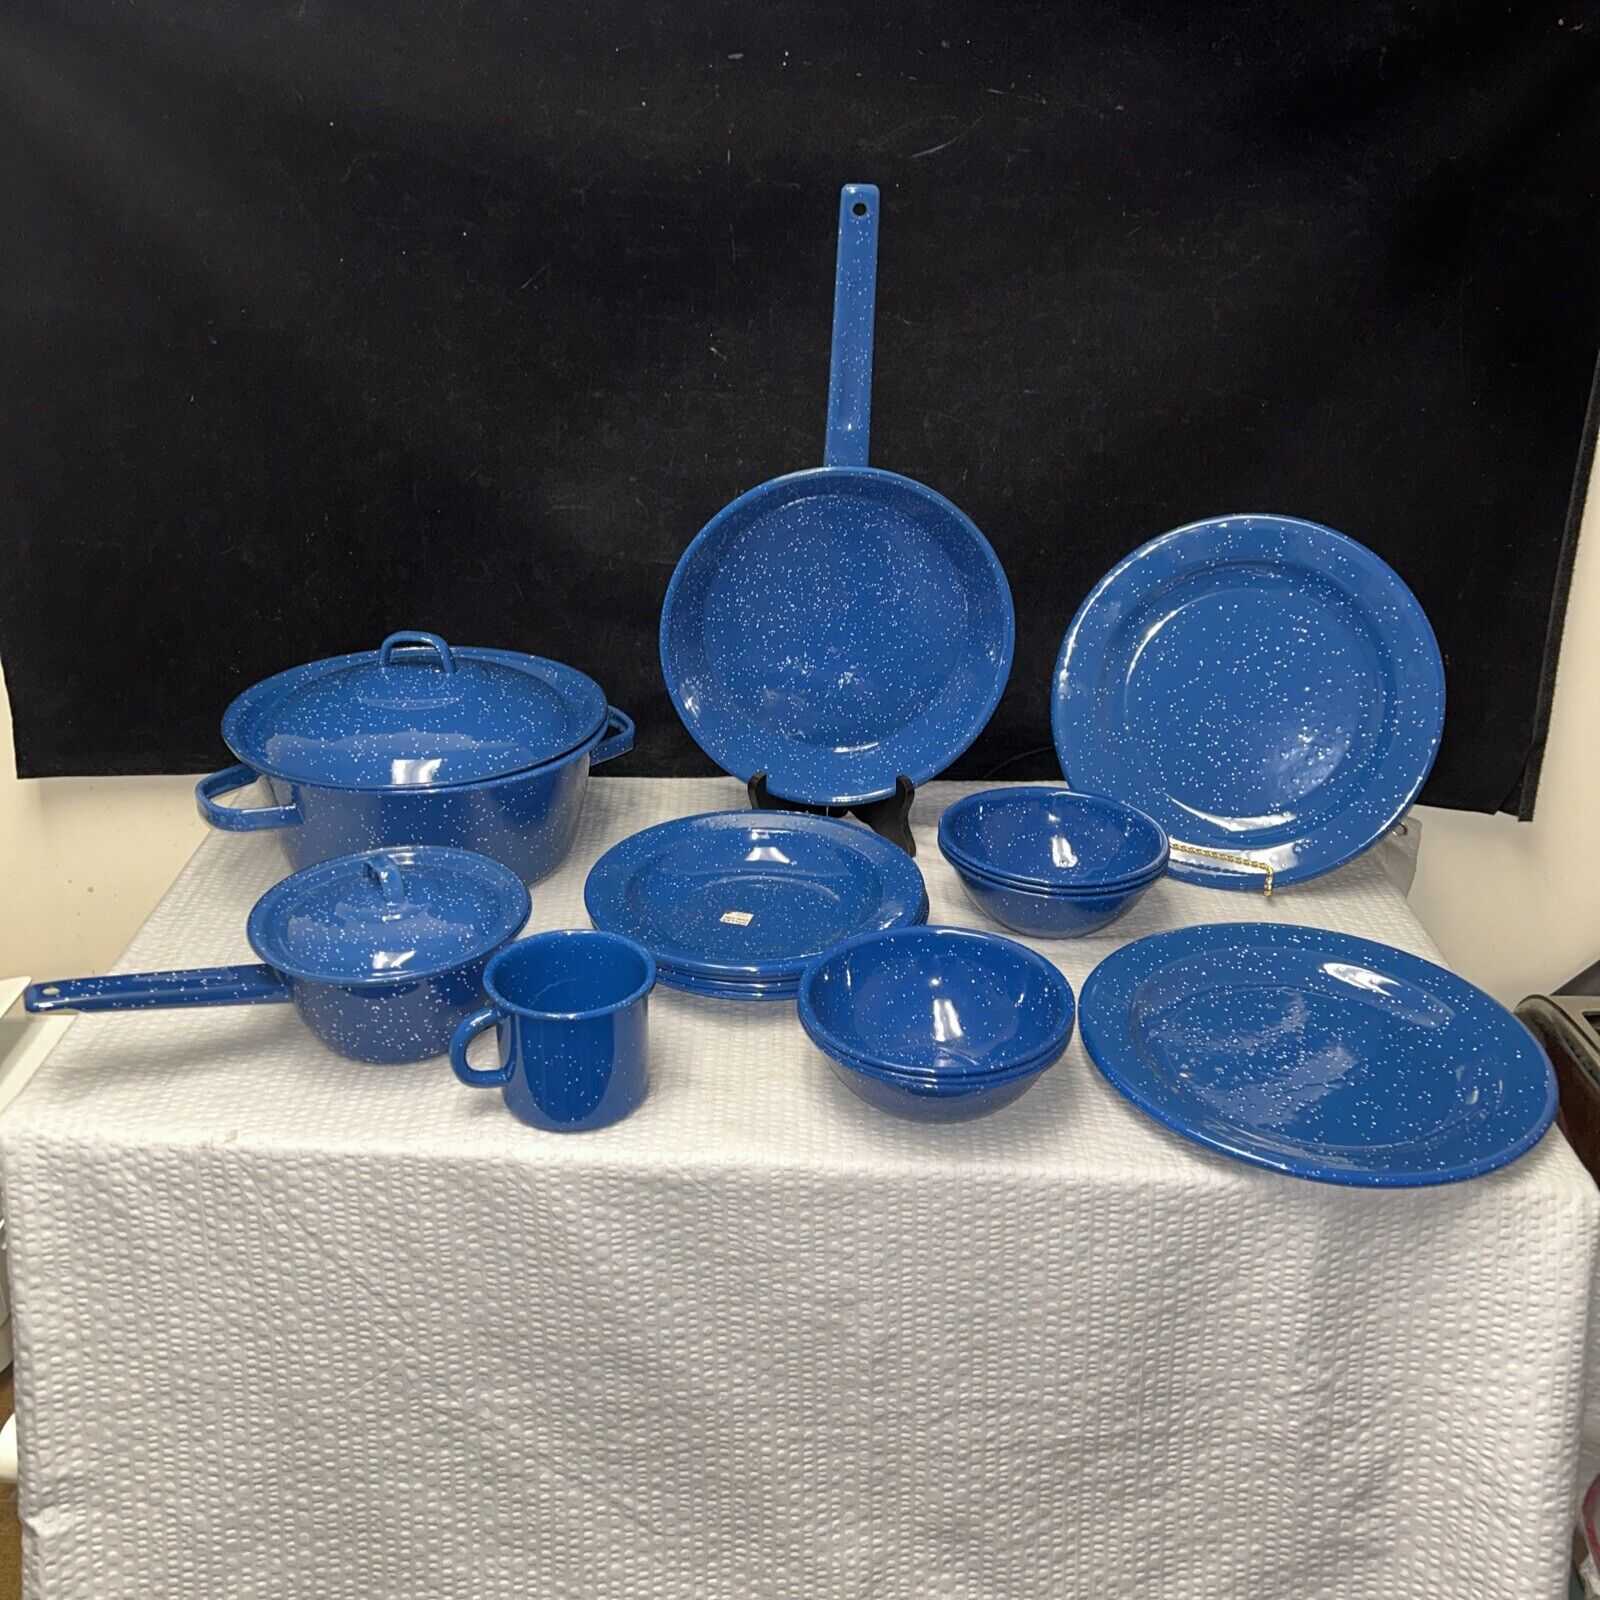 ENAMELWARE BLUE WHITE SPECKLED METAL CAMPING DISHES cookware Set Of 18